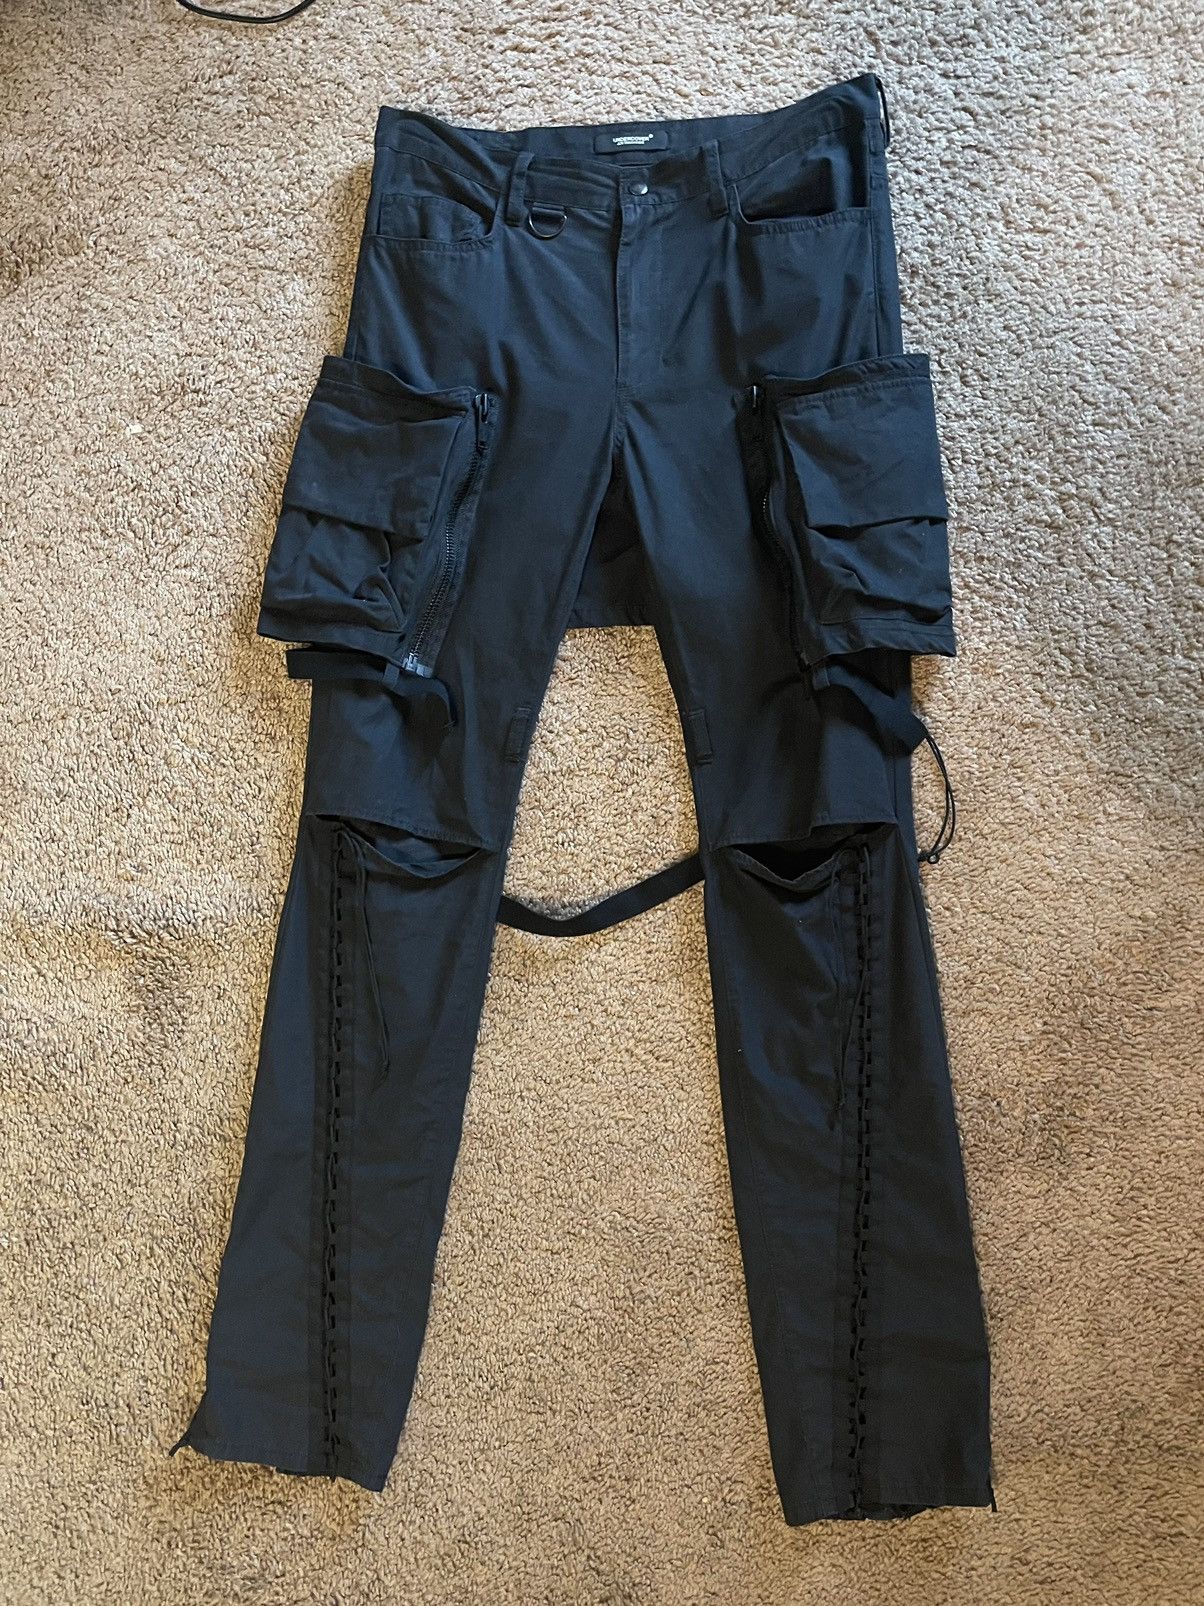 Undercover SS2019 NEW WARRIORS Cargo Skirted Pants | Grailed